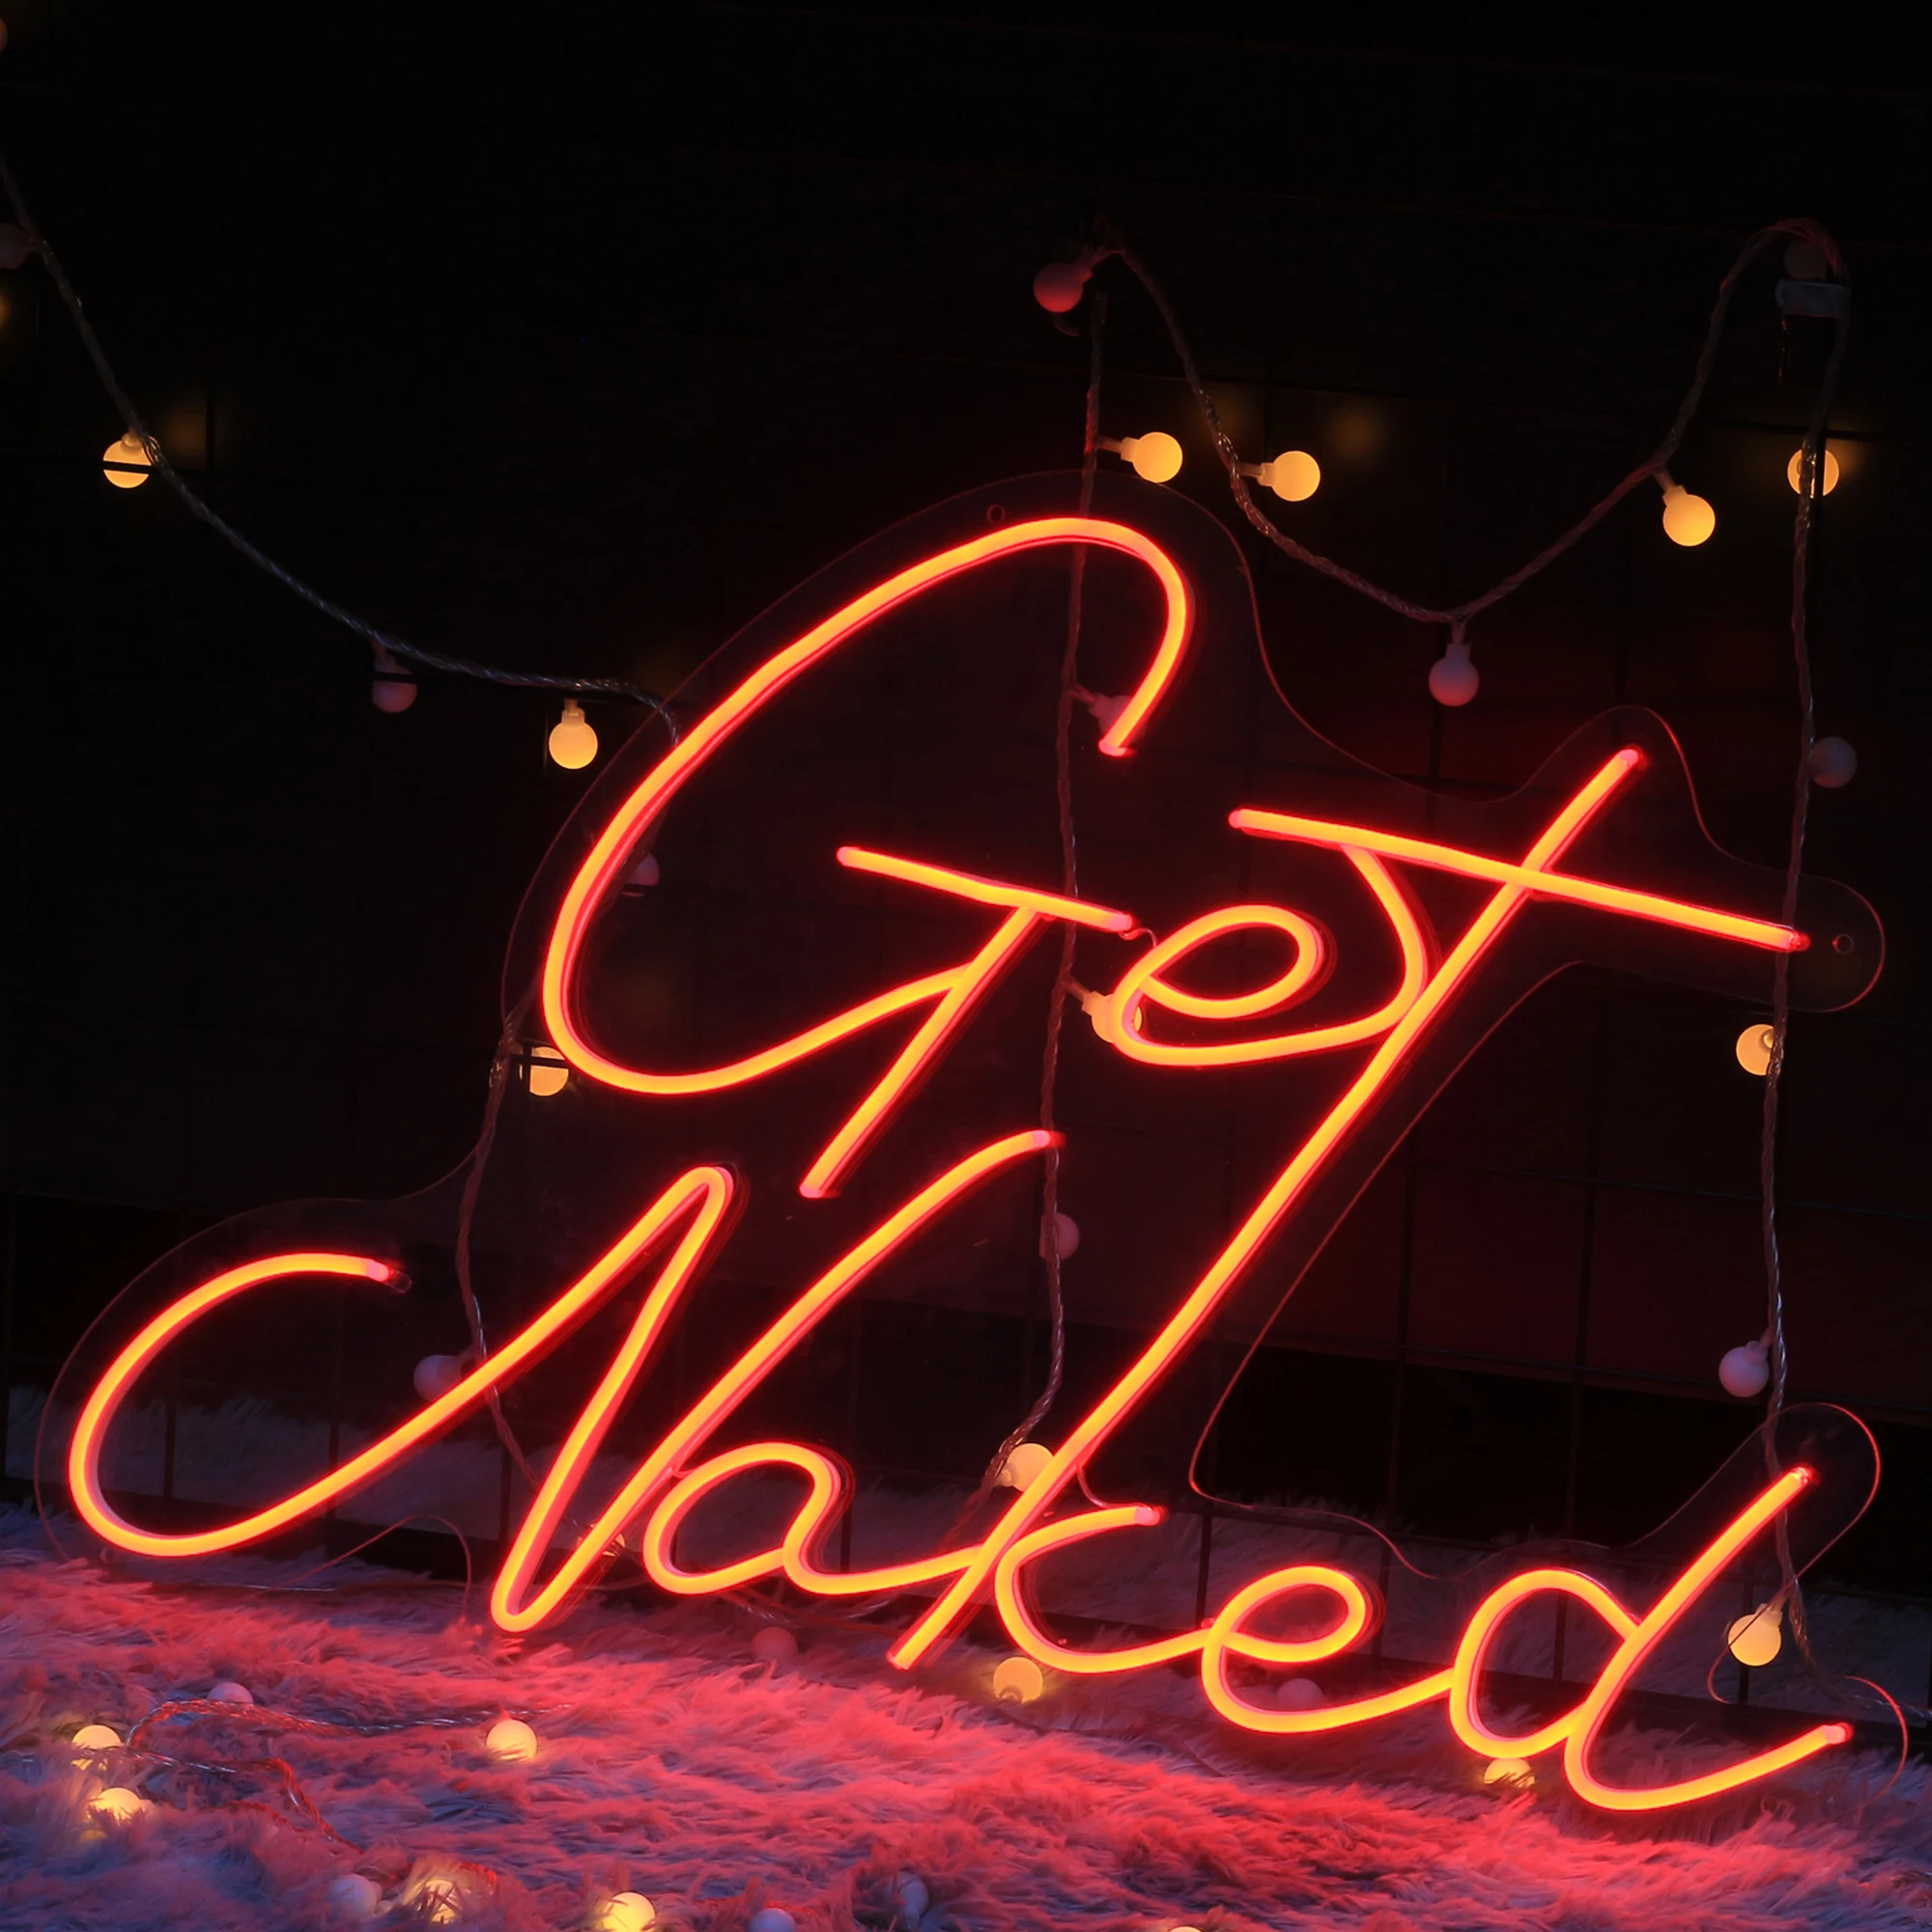 Custom Neon Light Signs Get Naked Art Wall Decorations Flexible Led For Room Club Birthday Party decorations Shop Bar Sign